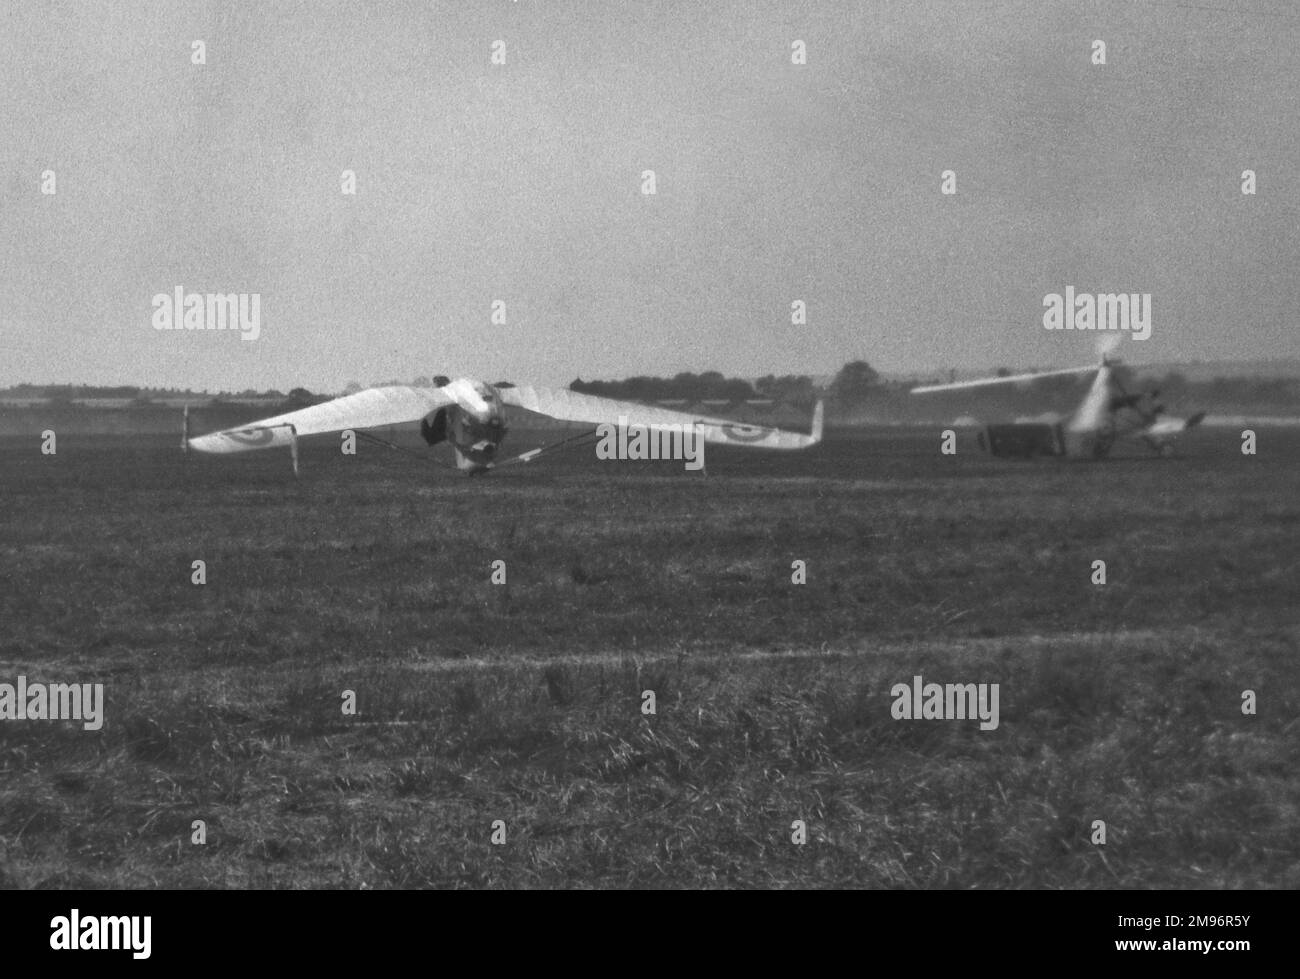 Two gliders in a field. The one on the left is a Westland-Hill Pterodactyl IV. The one on the right is a Cierva C.19 (Mk.I, II or III). Stock Photo